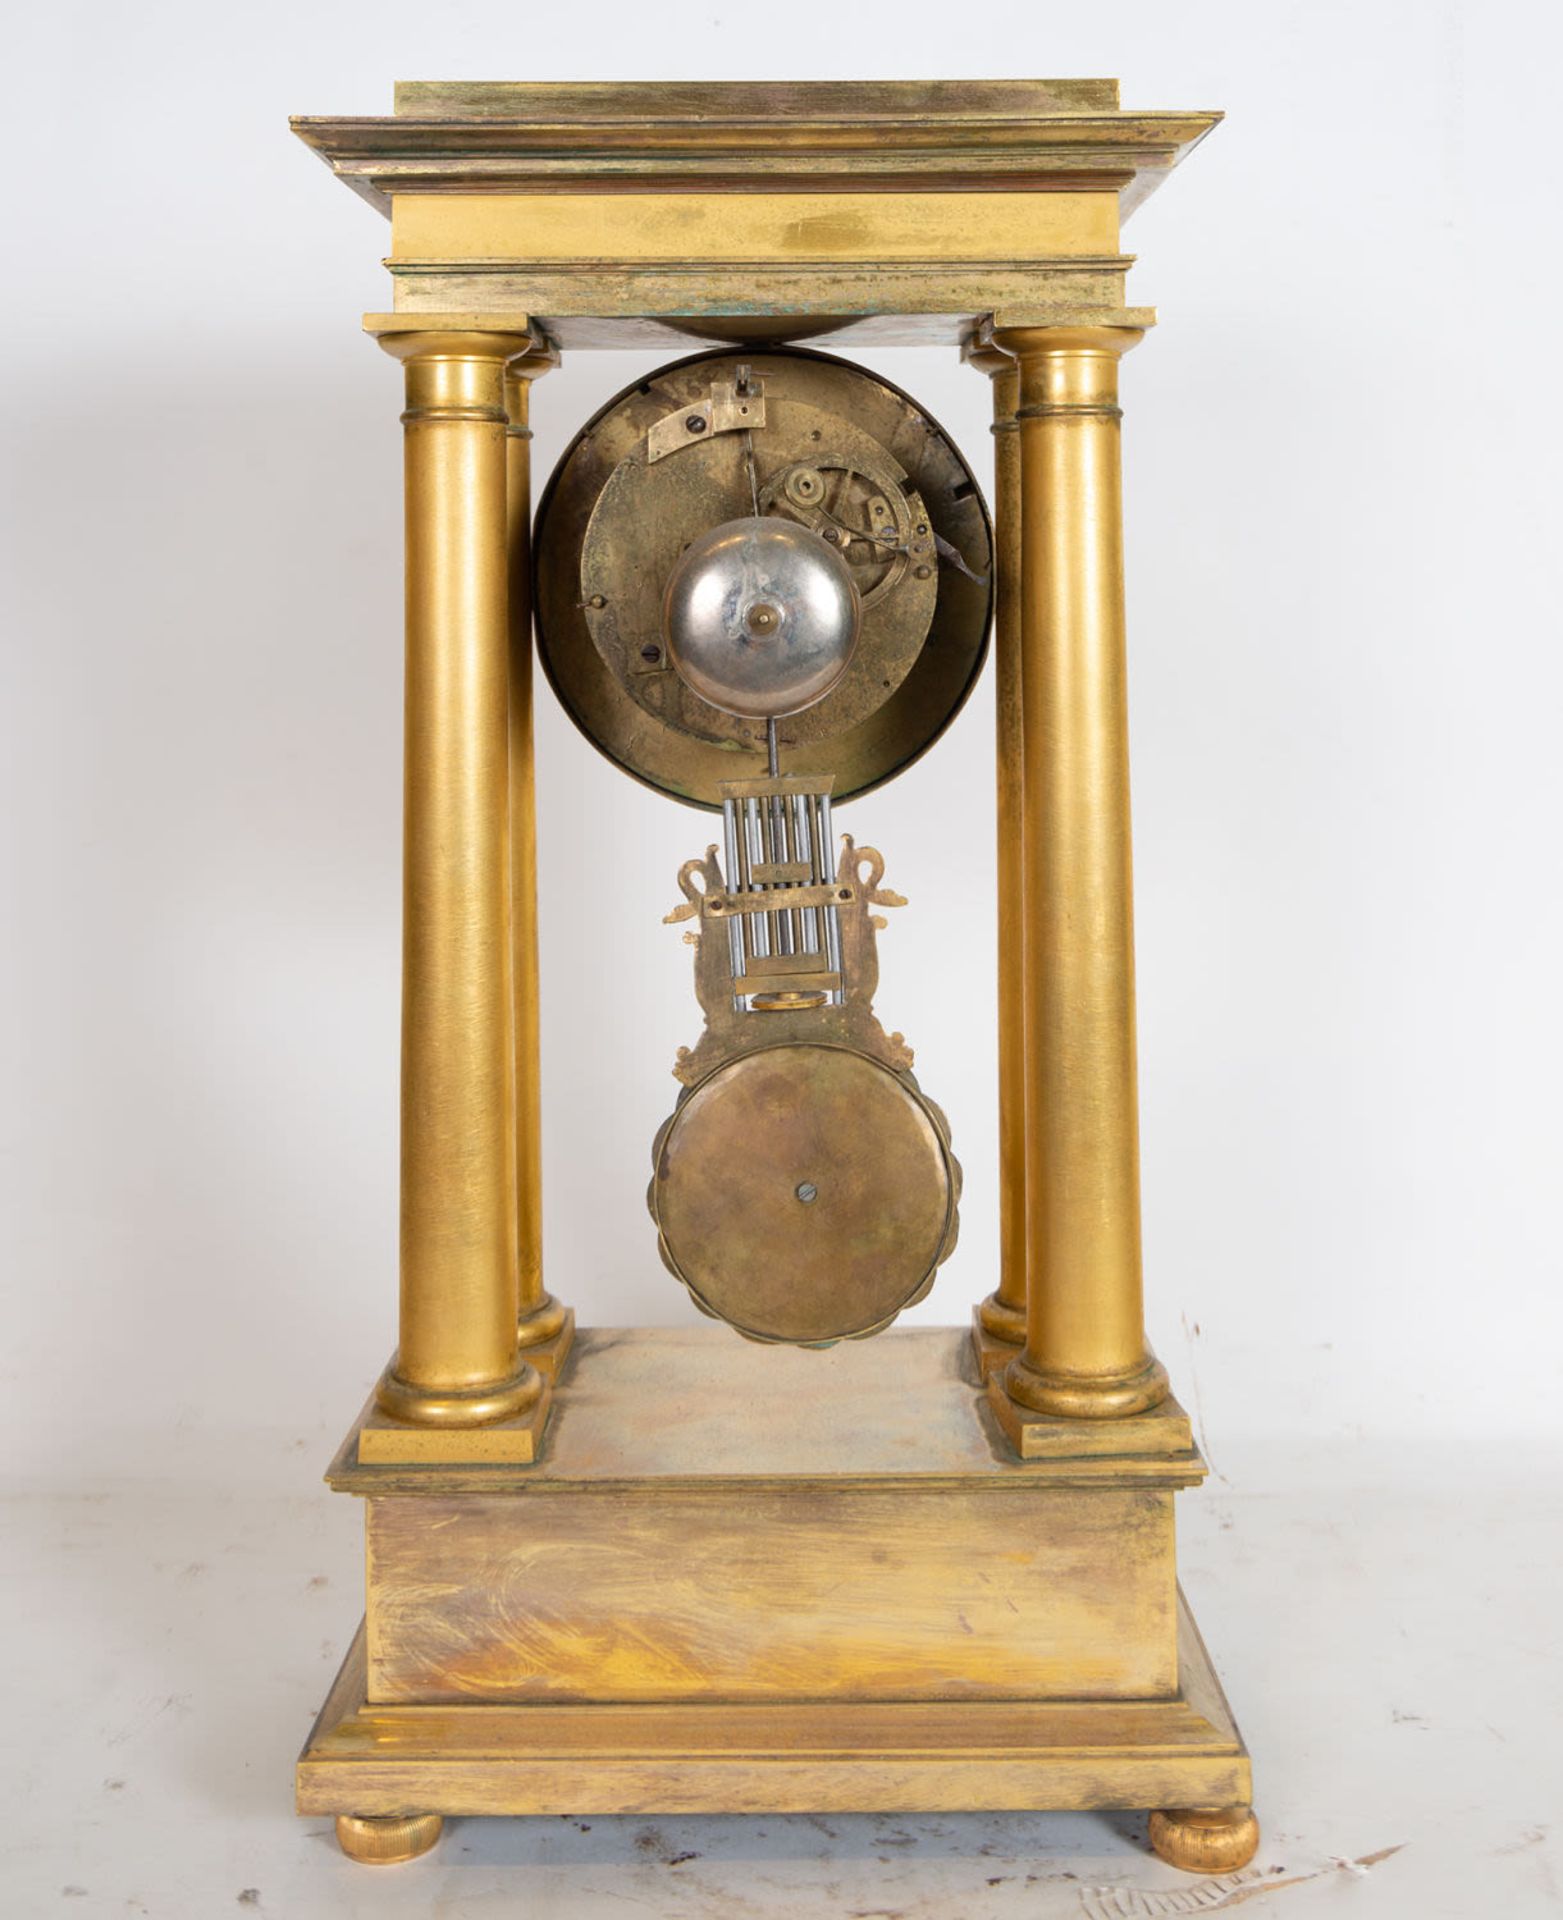 Large Bronze Clock in the shape of a Shrine with columns, French school of the 19th century - Image 4 of 5